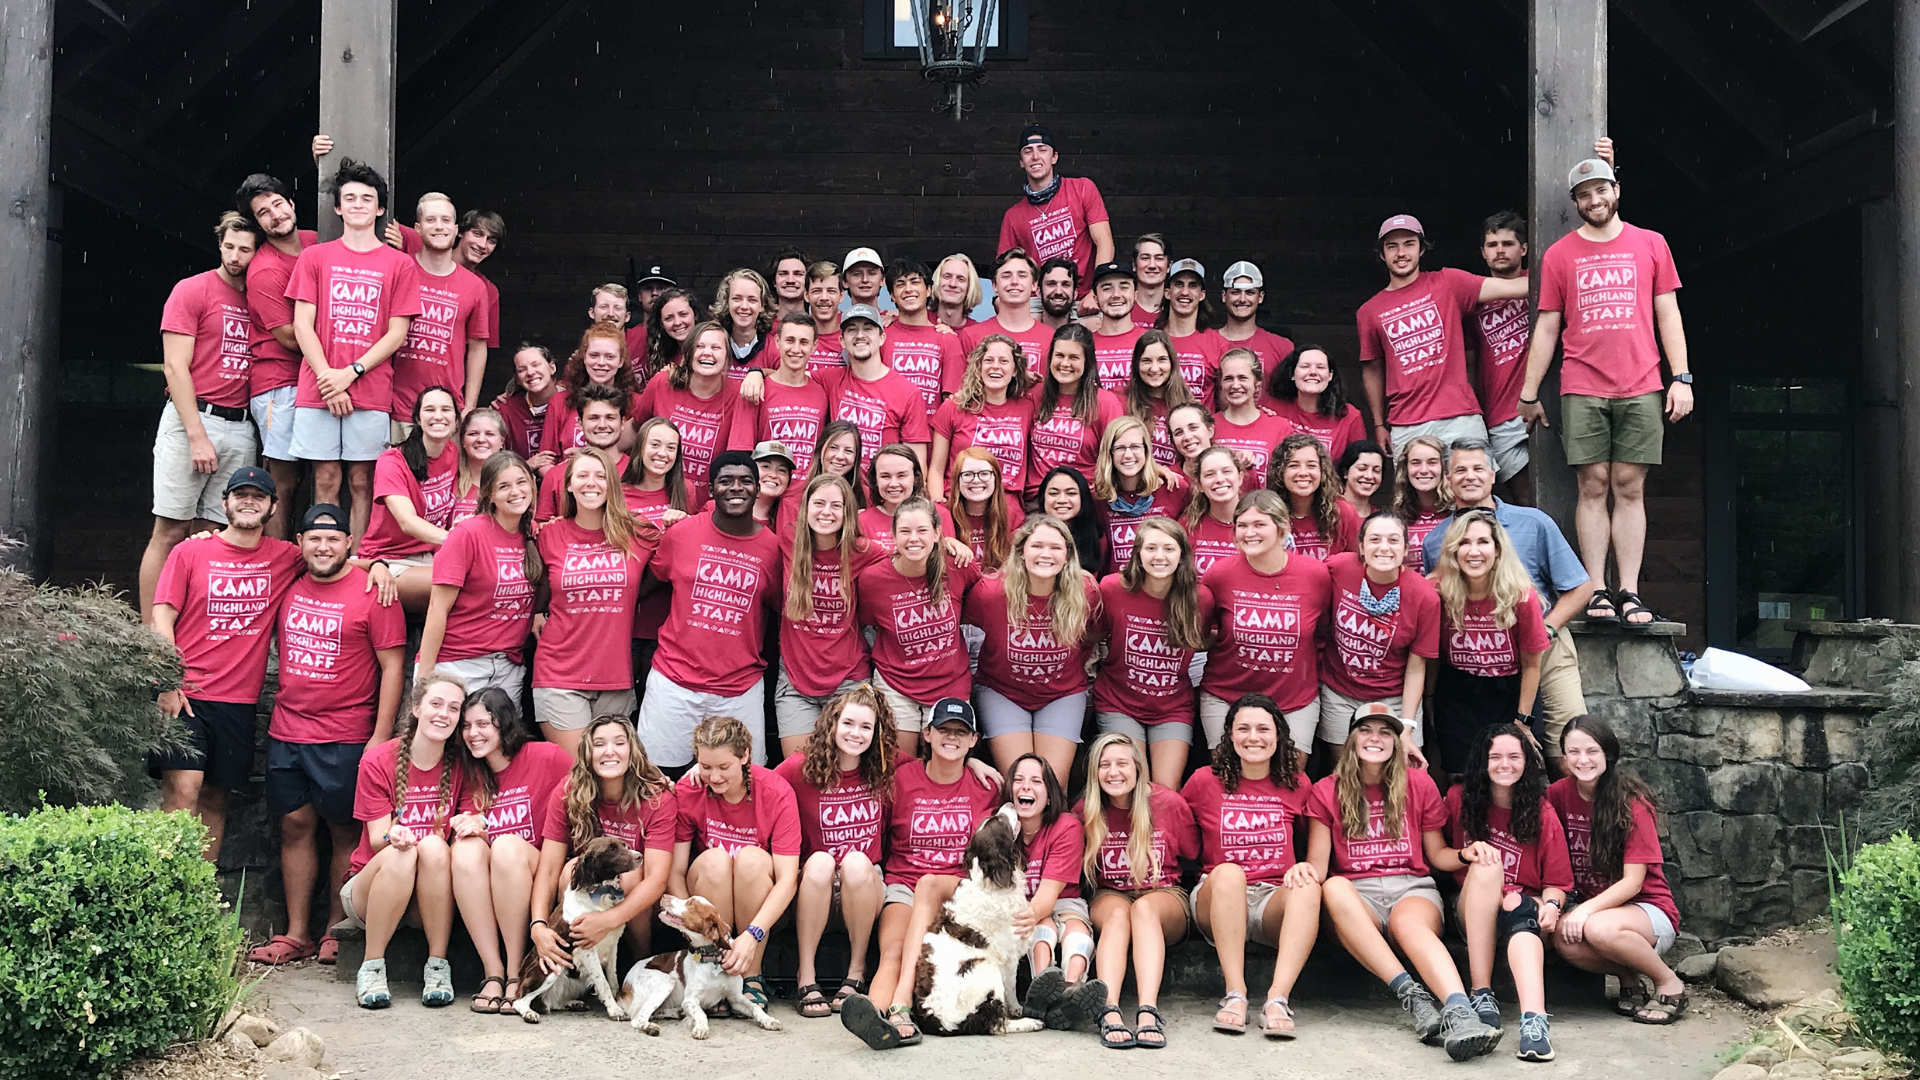 A Very Unique Summer – How Covid helped remind us why Camp is so special